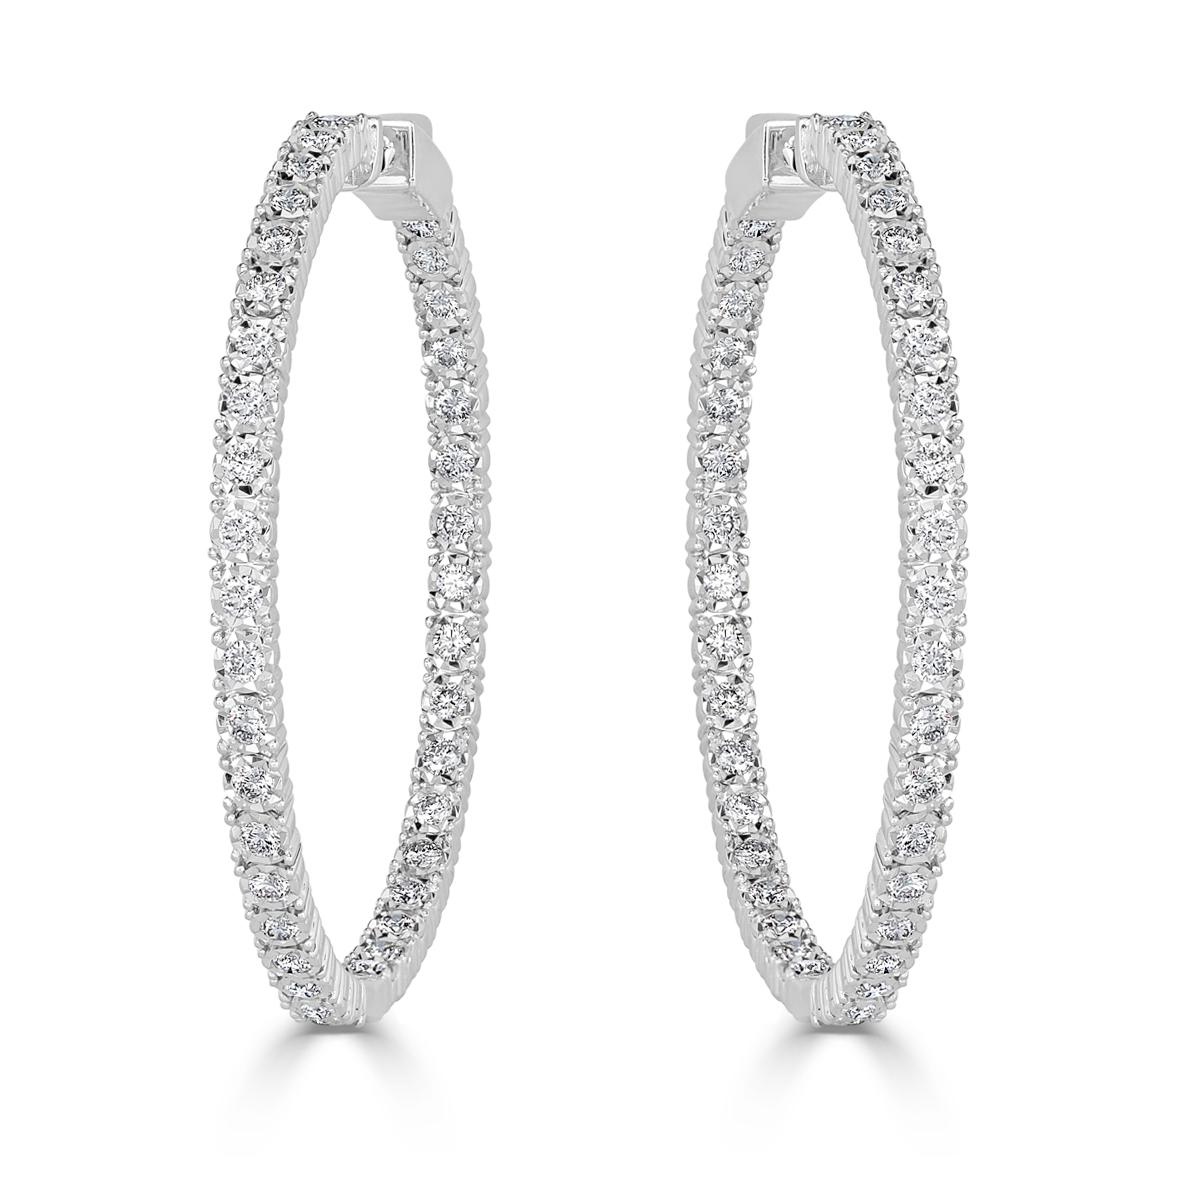 This gorgeous pair of diamond hoop earrings showcases 3.00ct of round brilliant cut diamonds graded at E-F in color, VS2-SI1 in clarity. They are set on the outside and the inside of the 14k white gold setting for maximum sparkle. Absolutely perfect